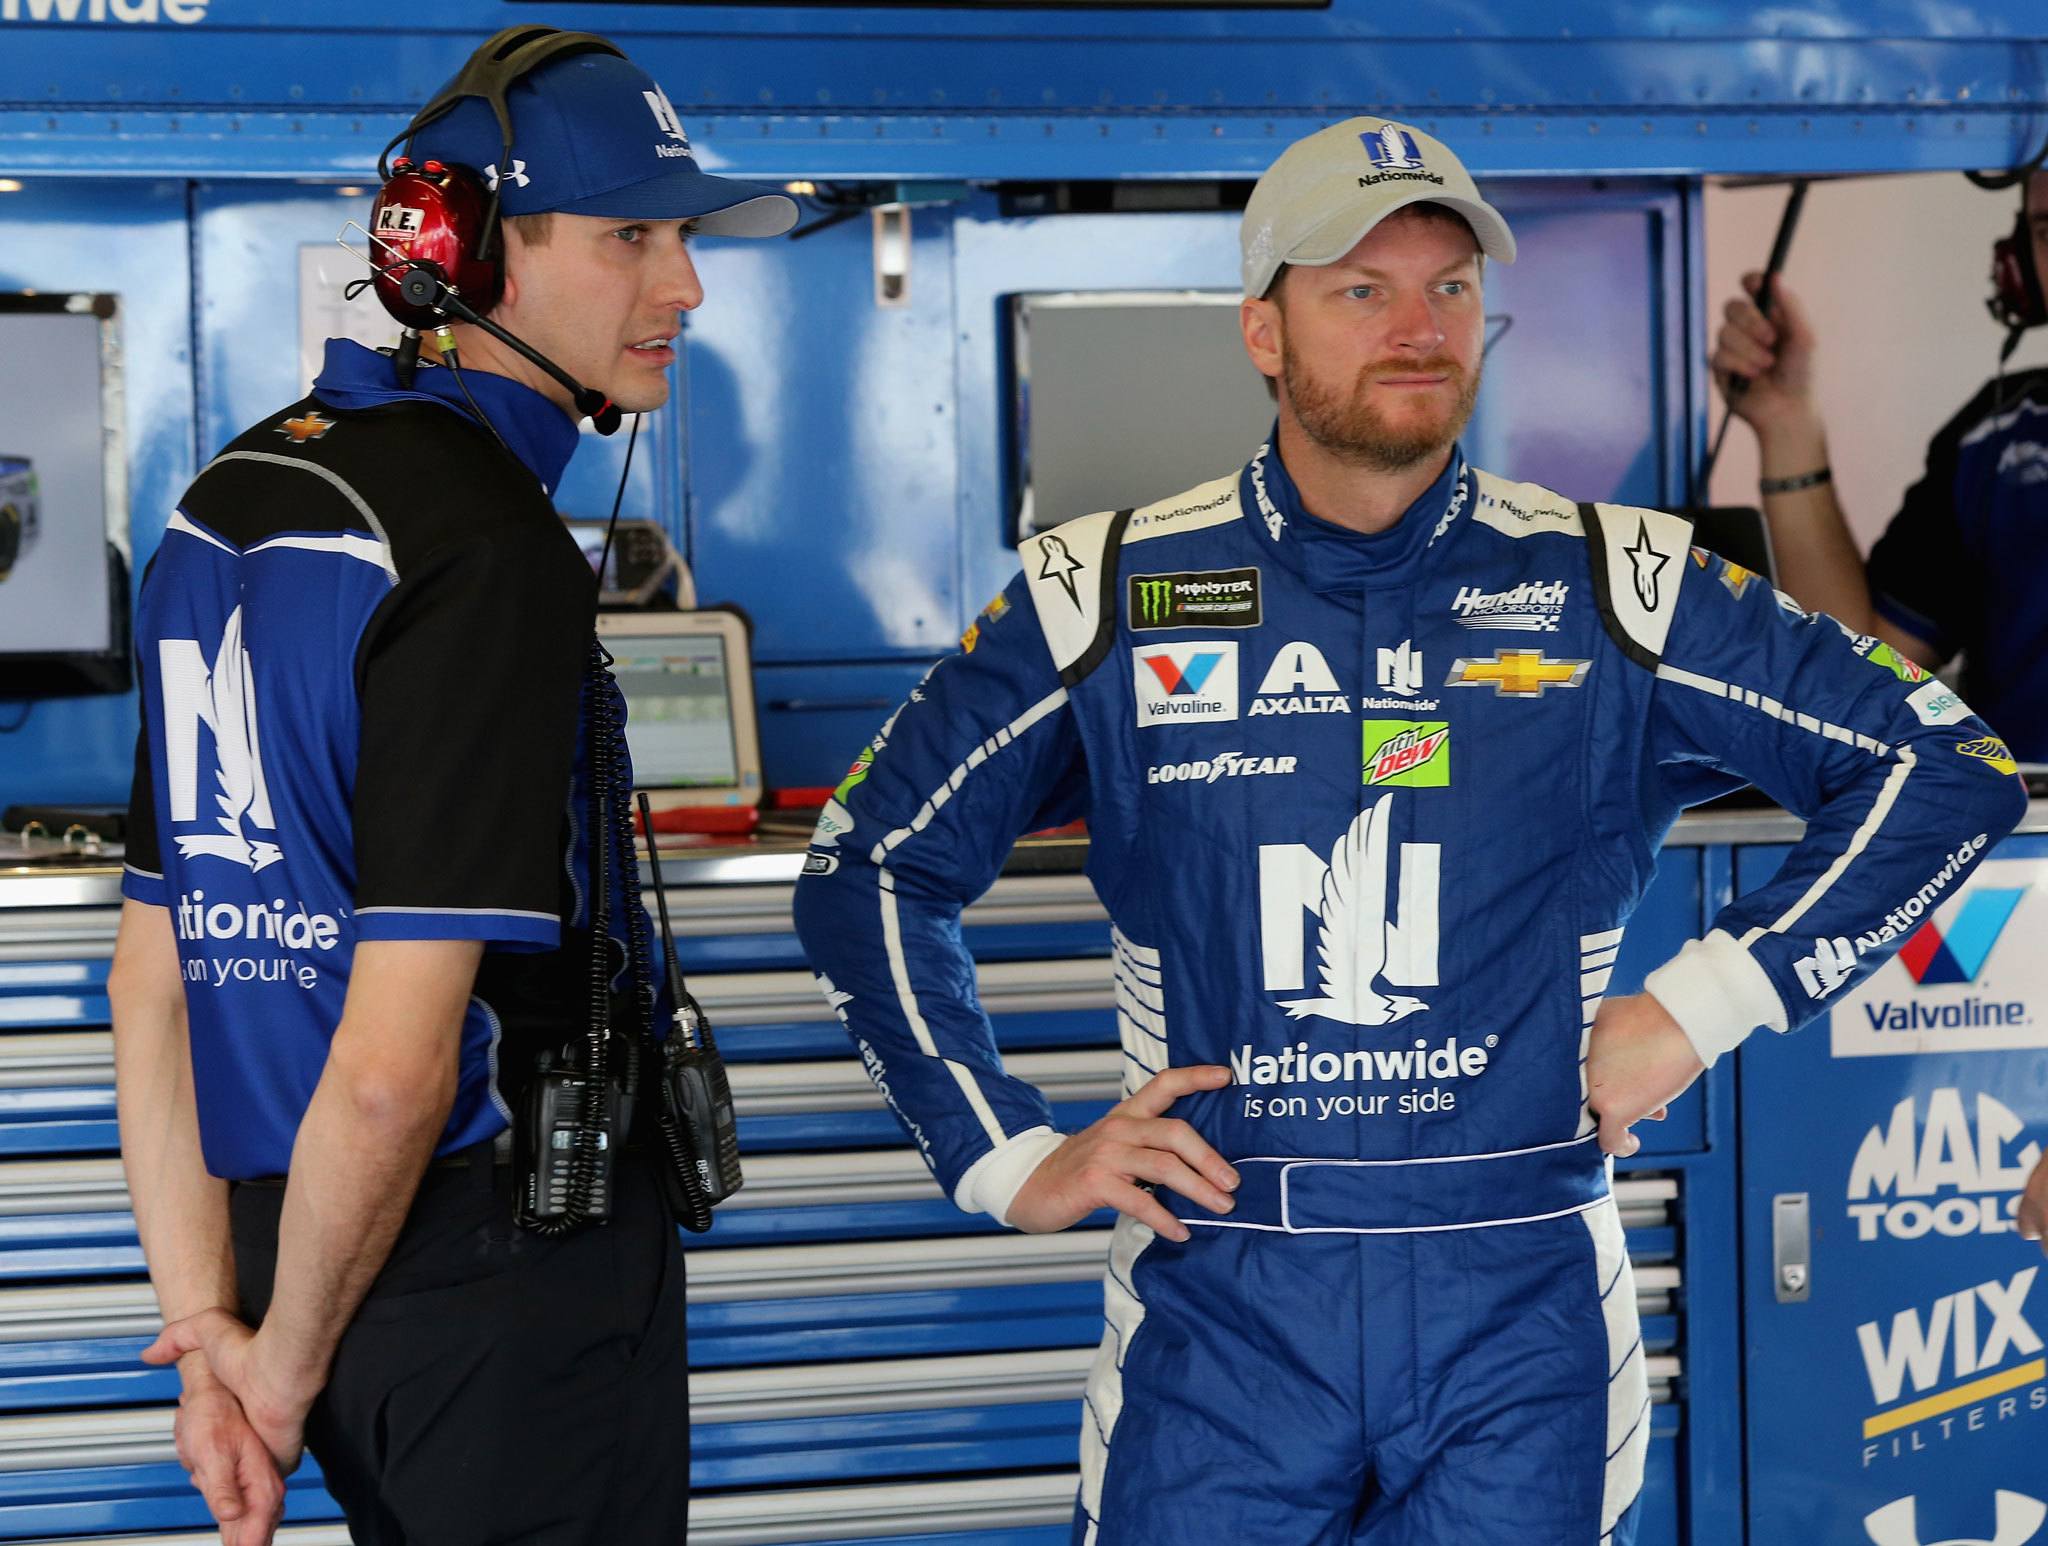 (Jerry Markland | NASCAR Media) Dale Earnhardt Jr. stands in the garage during practice for the Monster Energy NASCAR Cup Series 59th Annual DAYTONA 500 at Daytona International Speedway. Earnhardt Jr. returned to racing after leaving last season with concussion issues and may not race after the 2017 season.